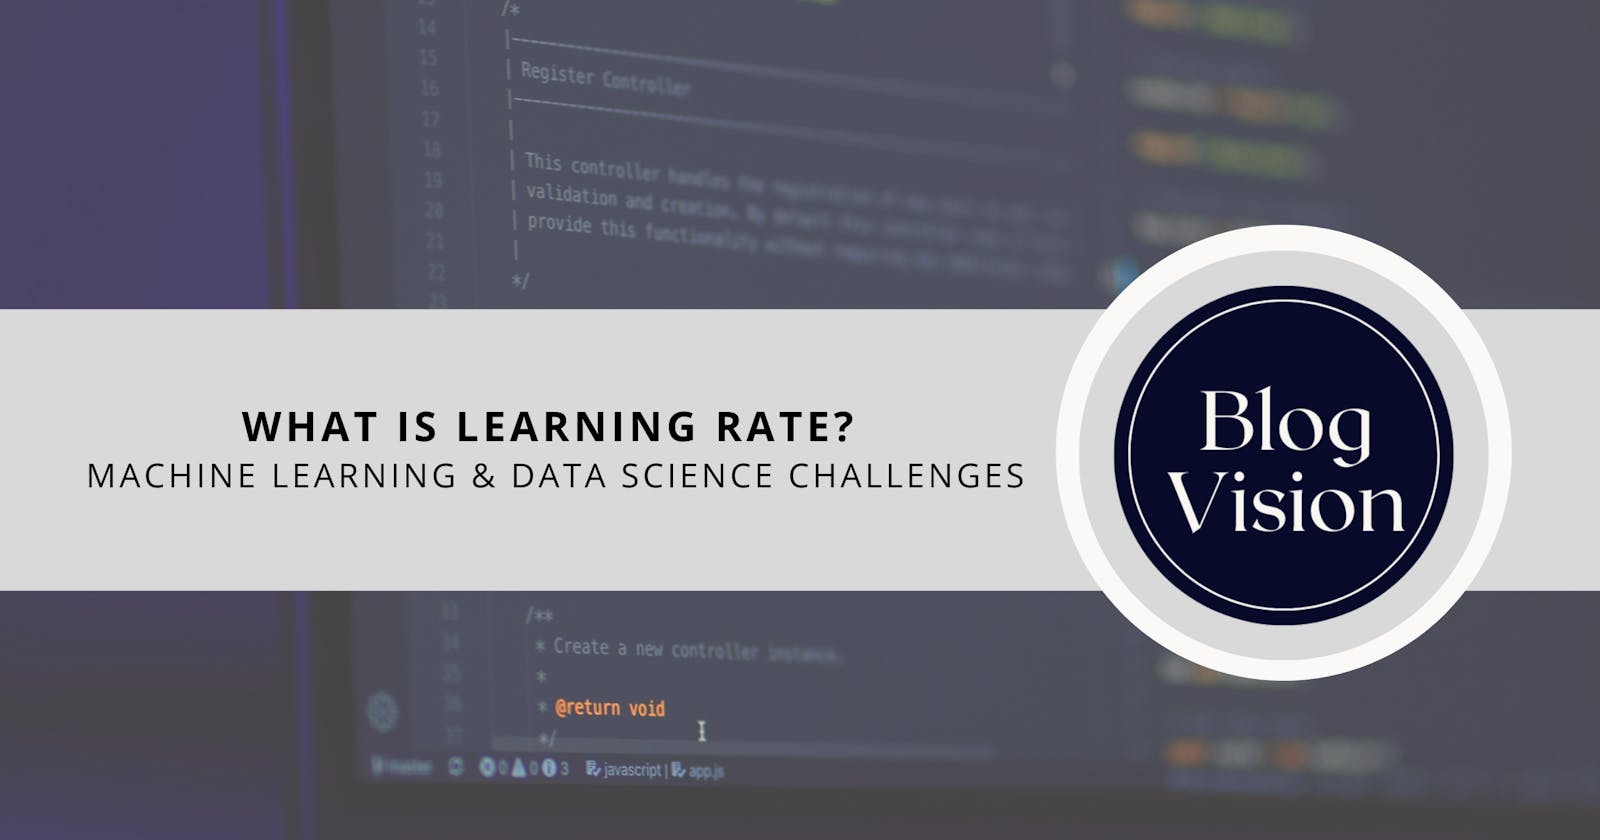 #67 Machine Learning & Data Science Challenge 67